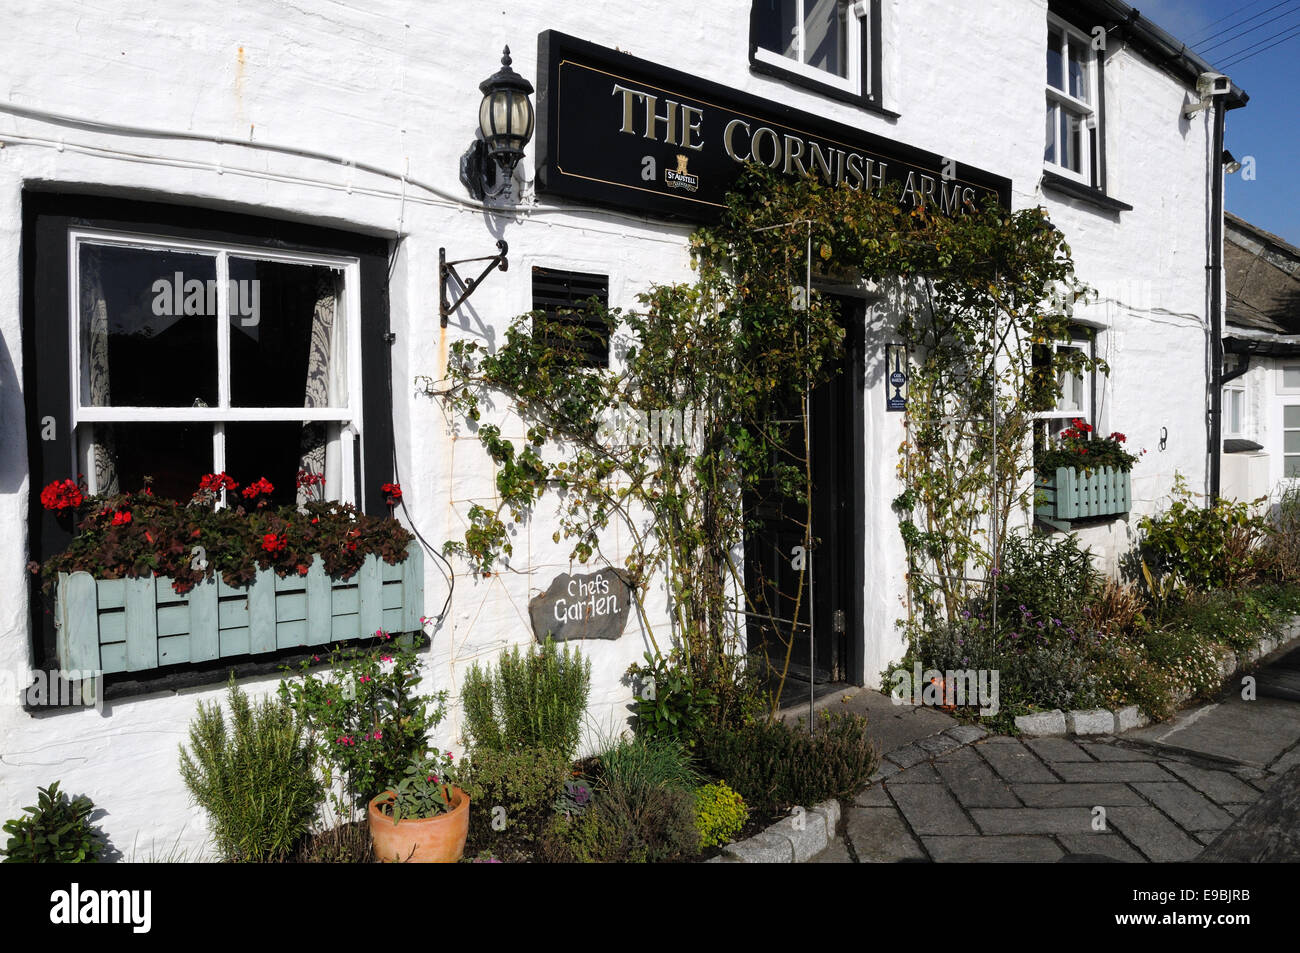 The Cornish Arms Rick Steins Pub in St Merryn Padstow Cornwall England Stock Photo